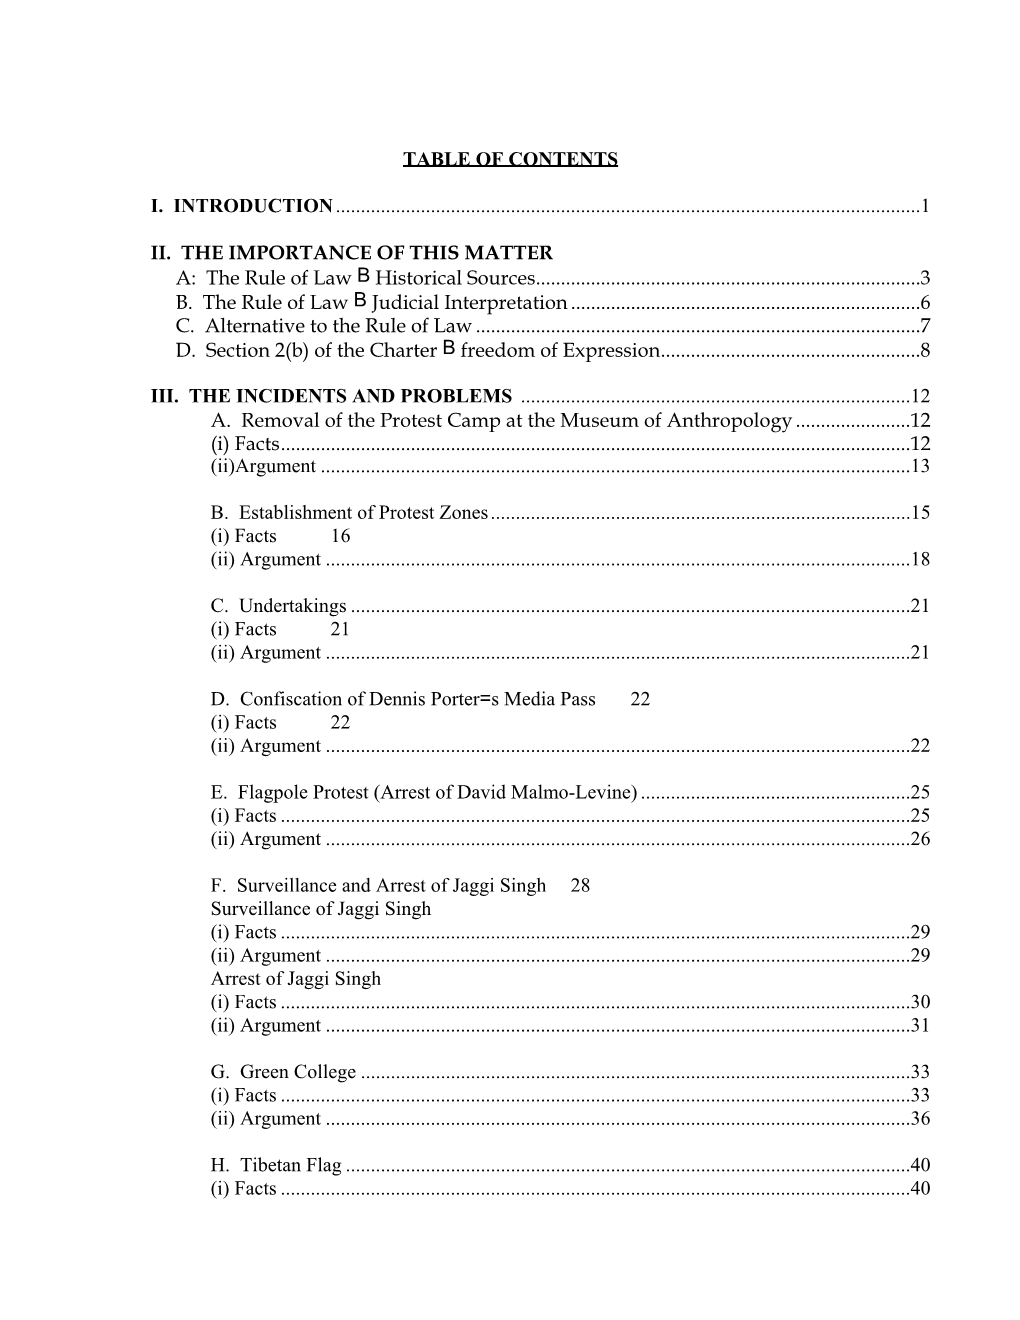 Table of Contents I. Introduction